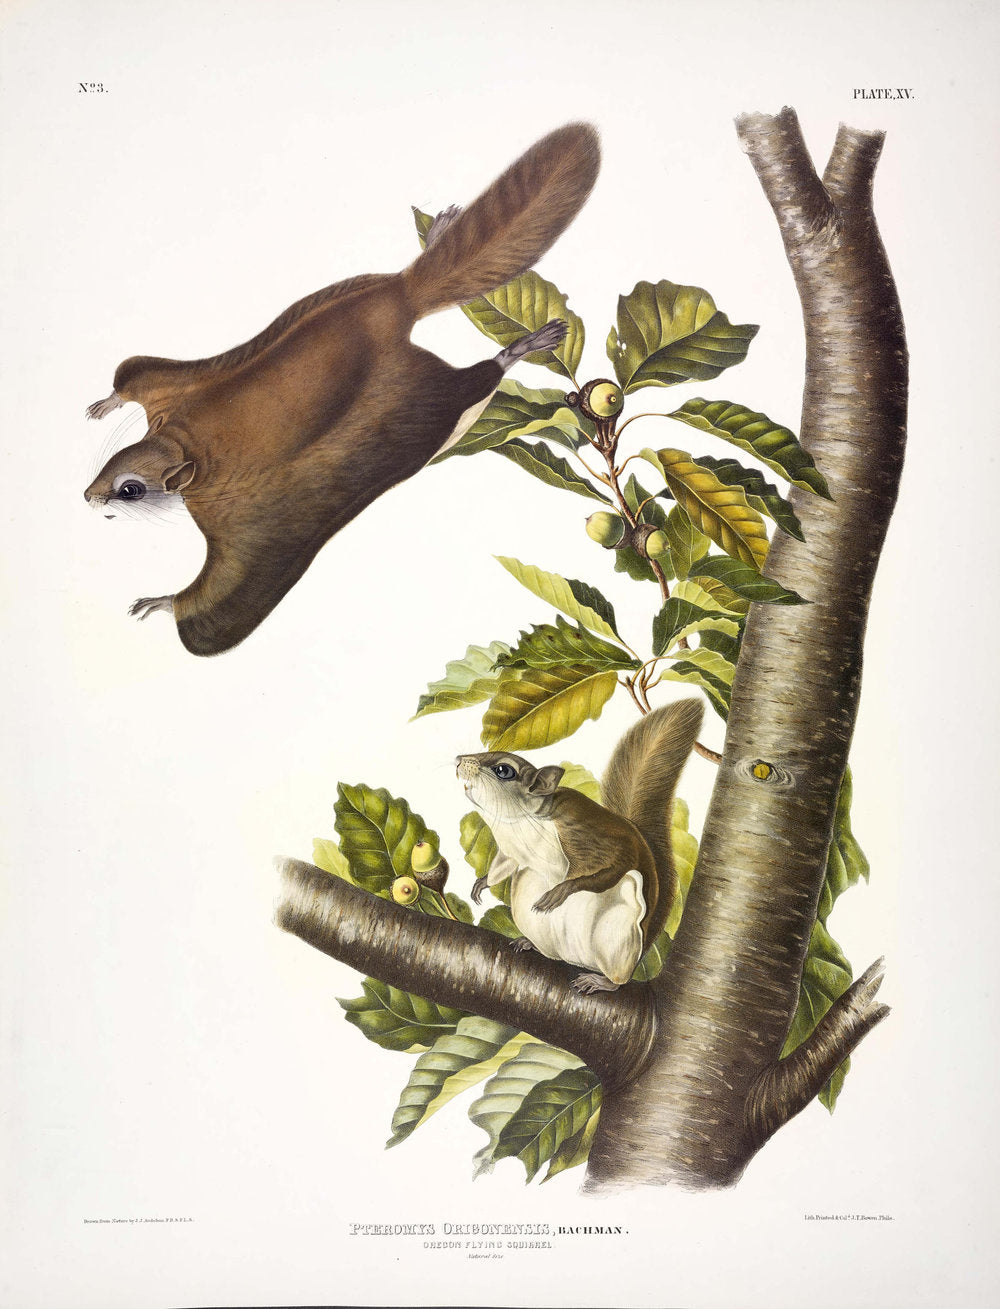 Plate I - Common American Wildcat From: Viviparous Quadrupeds of North America New York: 1845-1848 Hand colored lithograph Sheet size: 21 ¼” x 27”